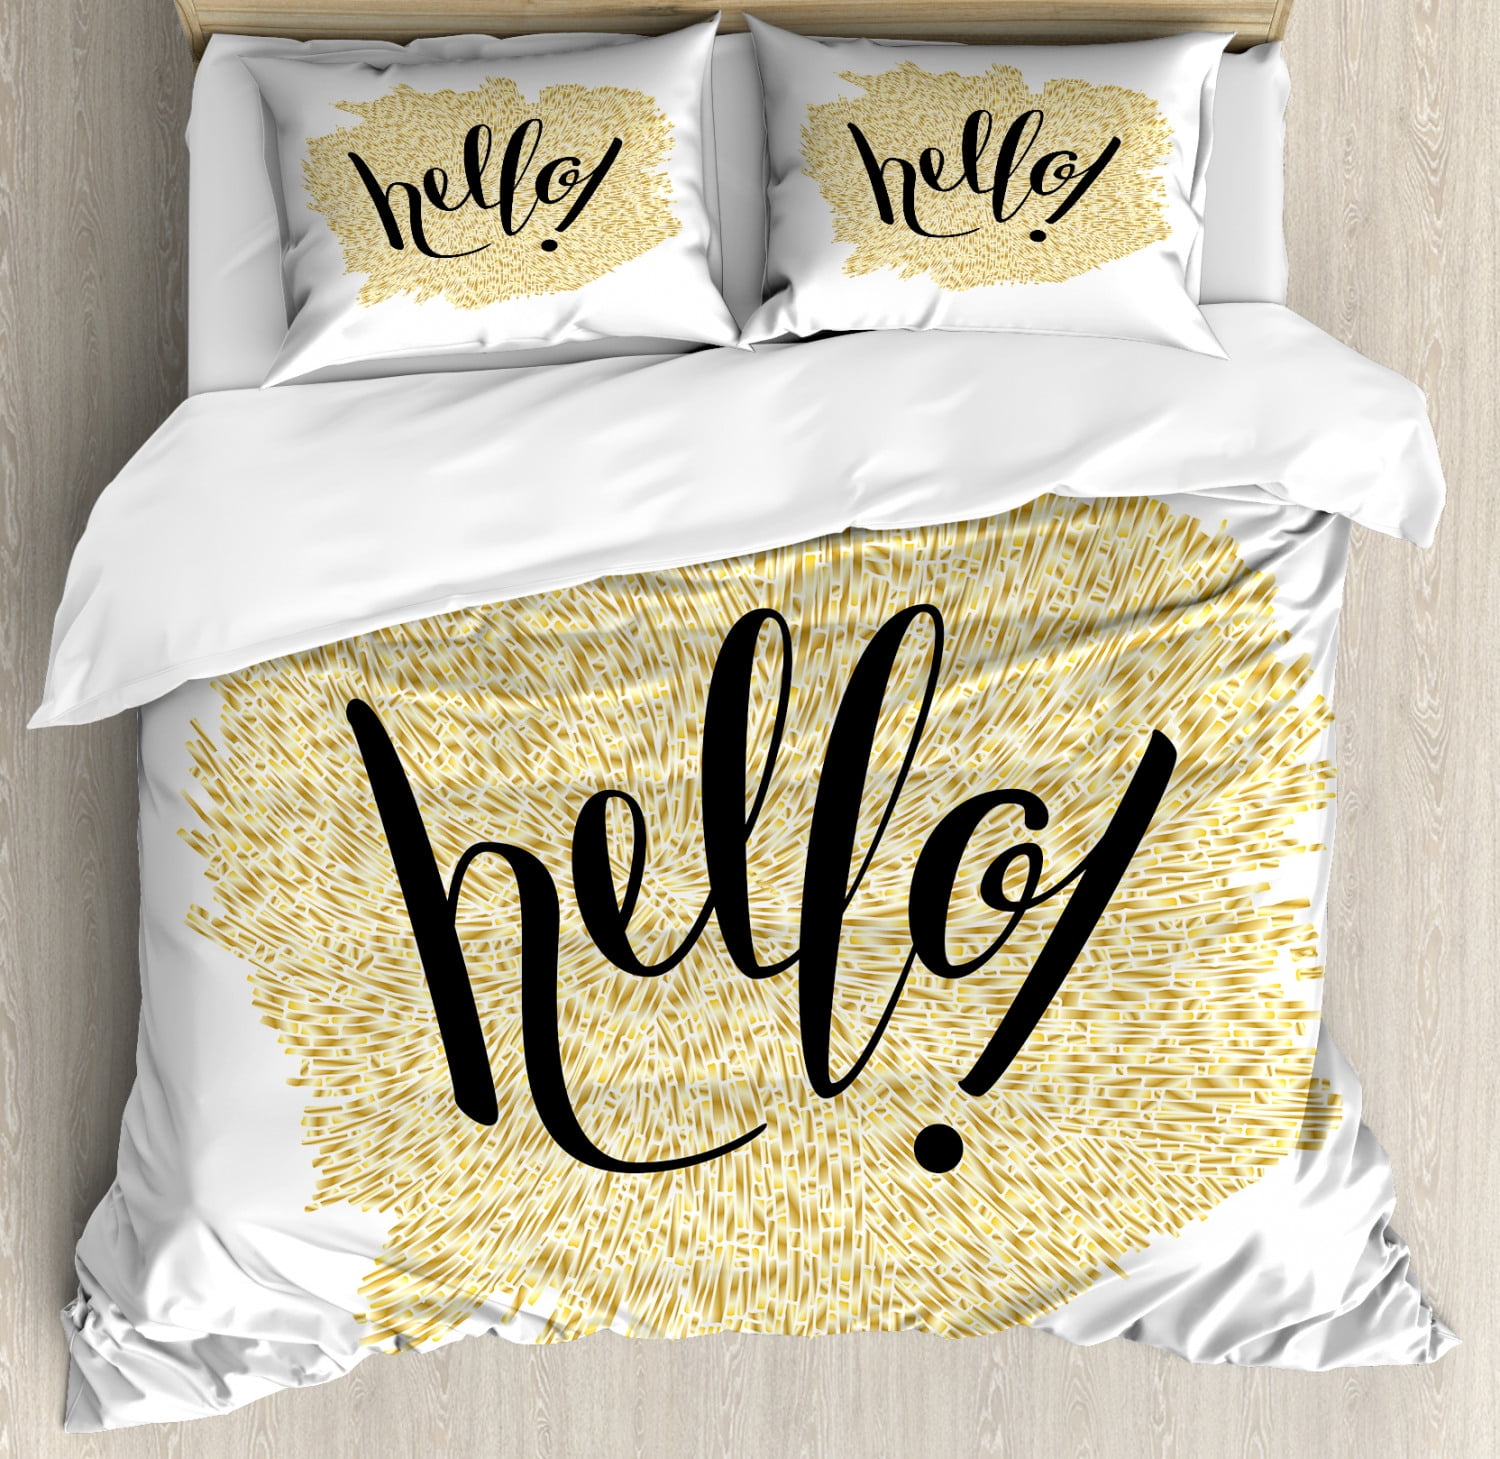 Hello King Size Duvet Cover Set Brush Pen Lettering Hello In Black With Gold Color Mosaic Looking Background Decorative 3 Piece Bedding Set With 2 Pillow Shams Black White Gold By Ambesonne